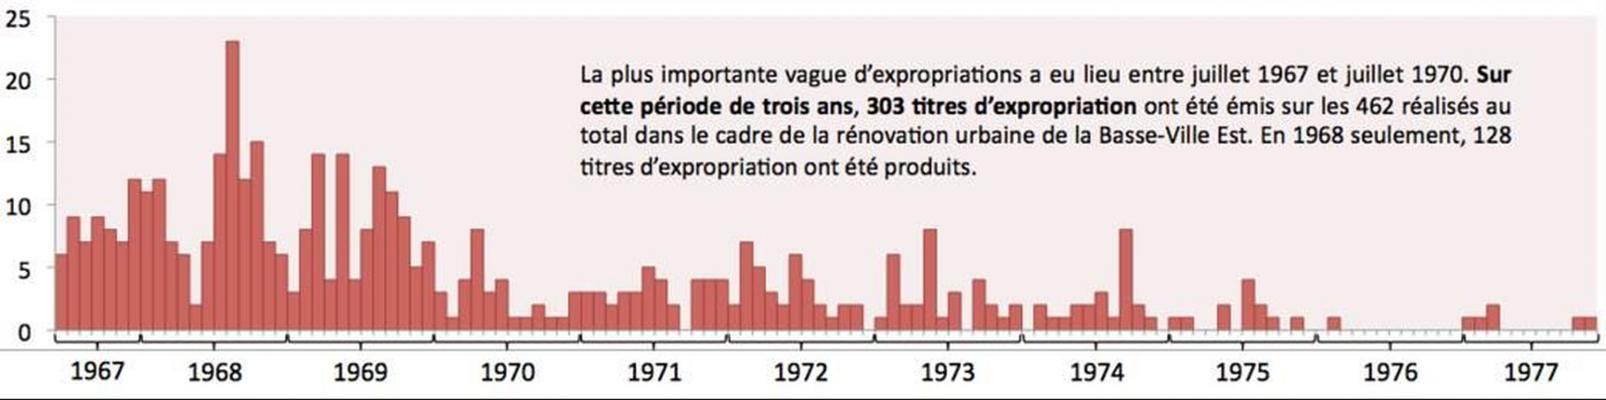 Bar chart in colour representing the number of expropriation titles issued by month and by year. Expropriations are most numerous from 1967 to 1970, and gradually decrease until 1977.